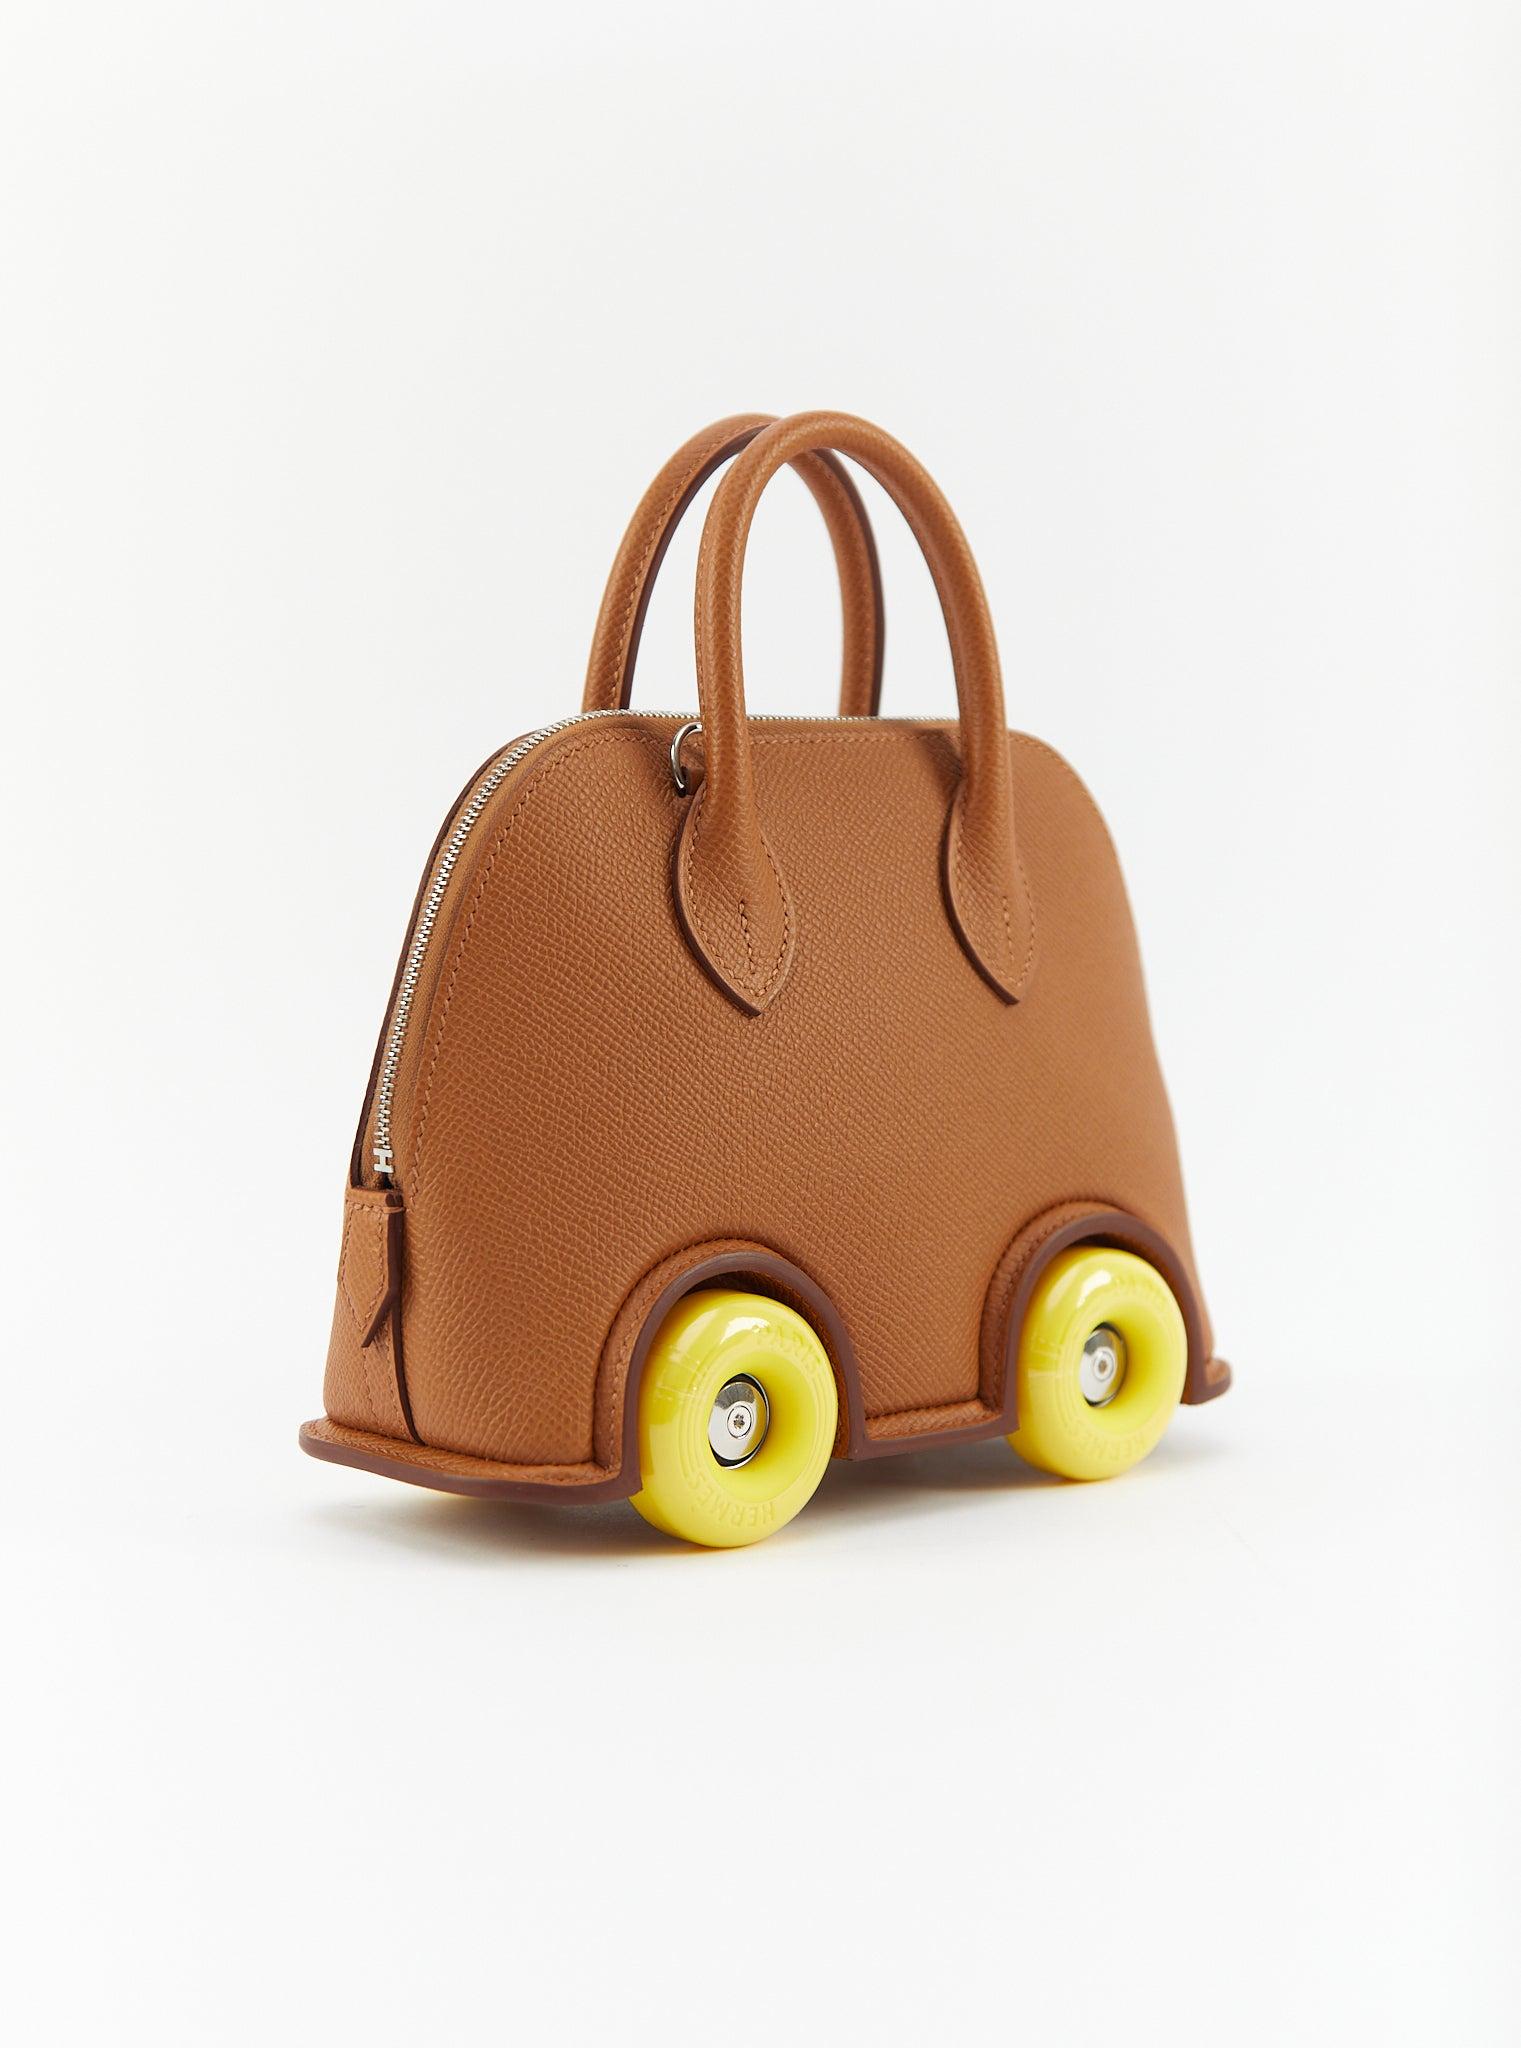 Hermès Mini Bolide on Wheels in Gold

Epsom Leather with Palladium Hardware 

B Stamp / 2023

Accompanied with: Original receipt, Hermès Box, dustbag and ribbon

Measurements: H 14.5 x W 18.5 x D 7.3 cm

Strap length: 104 cm 